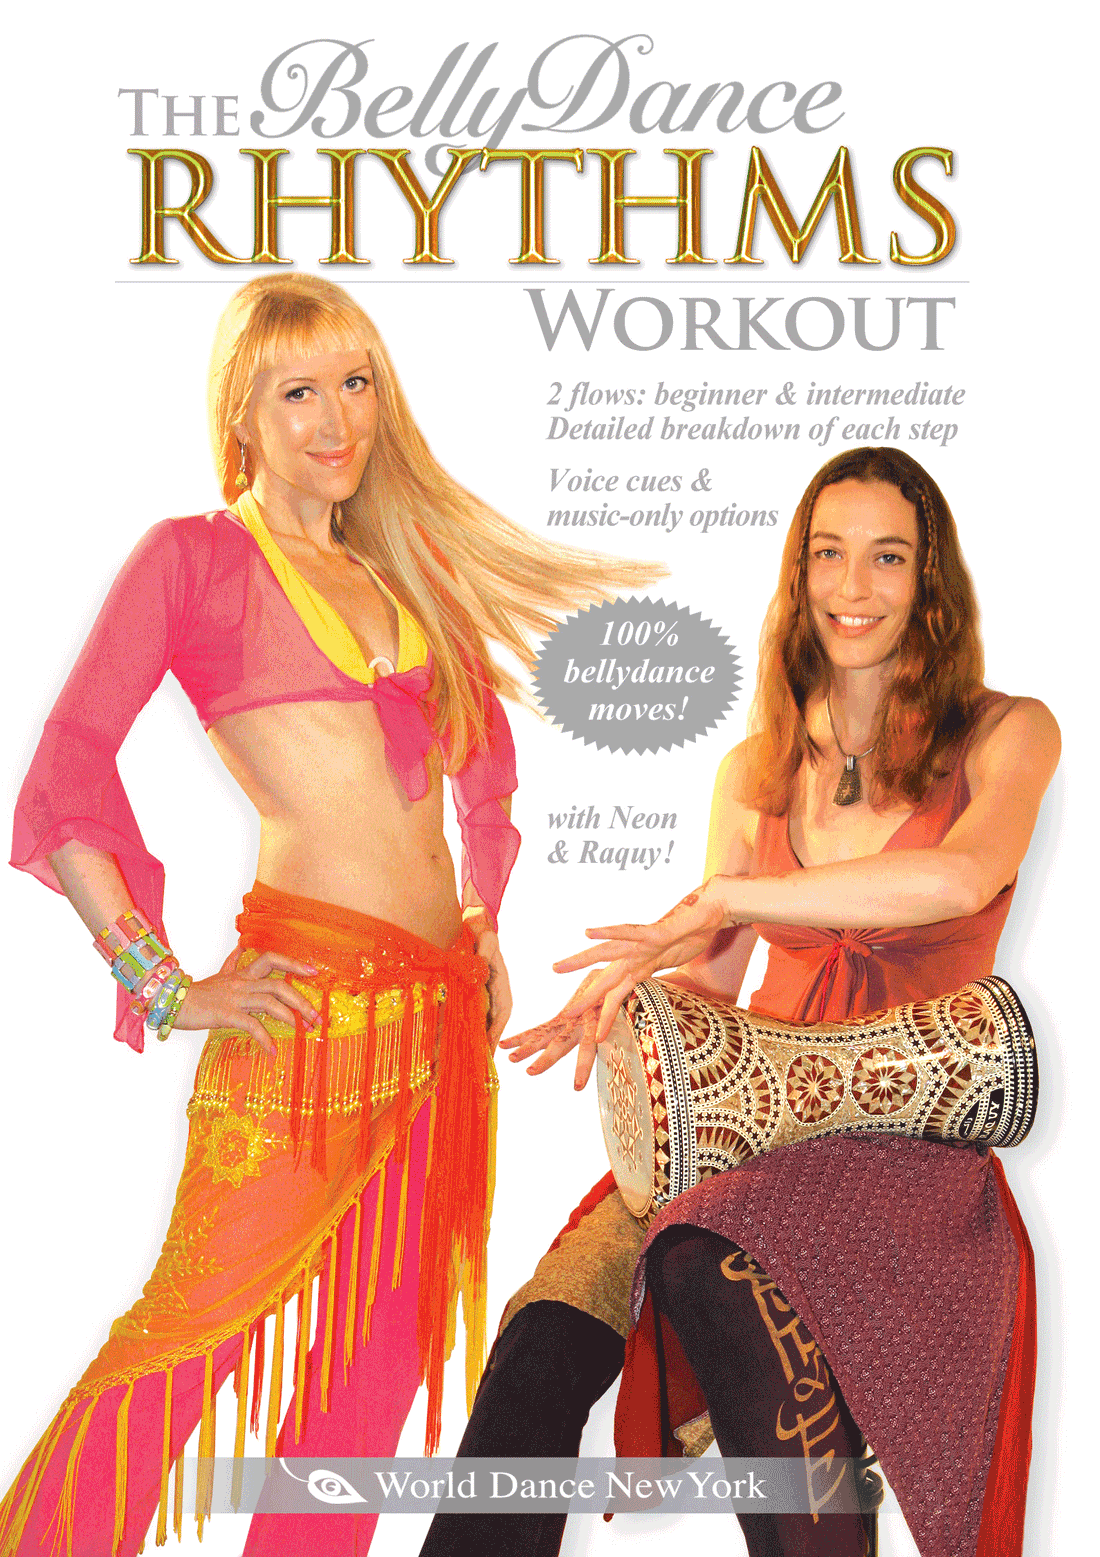 The Belly Dance Rhythms Workout with Neon - INSTANT VIDEO / DVD - World Dance New York